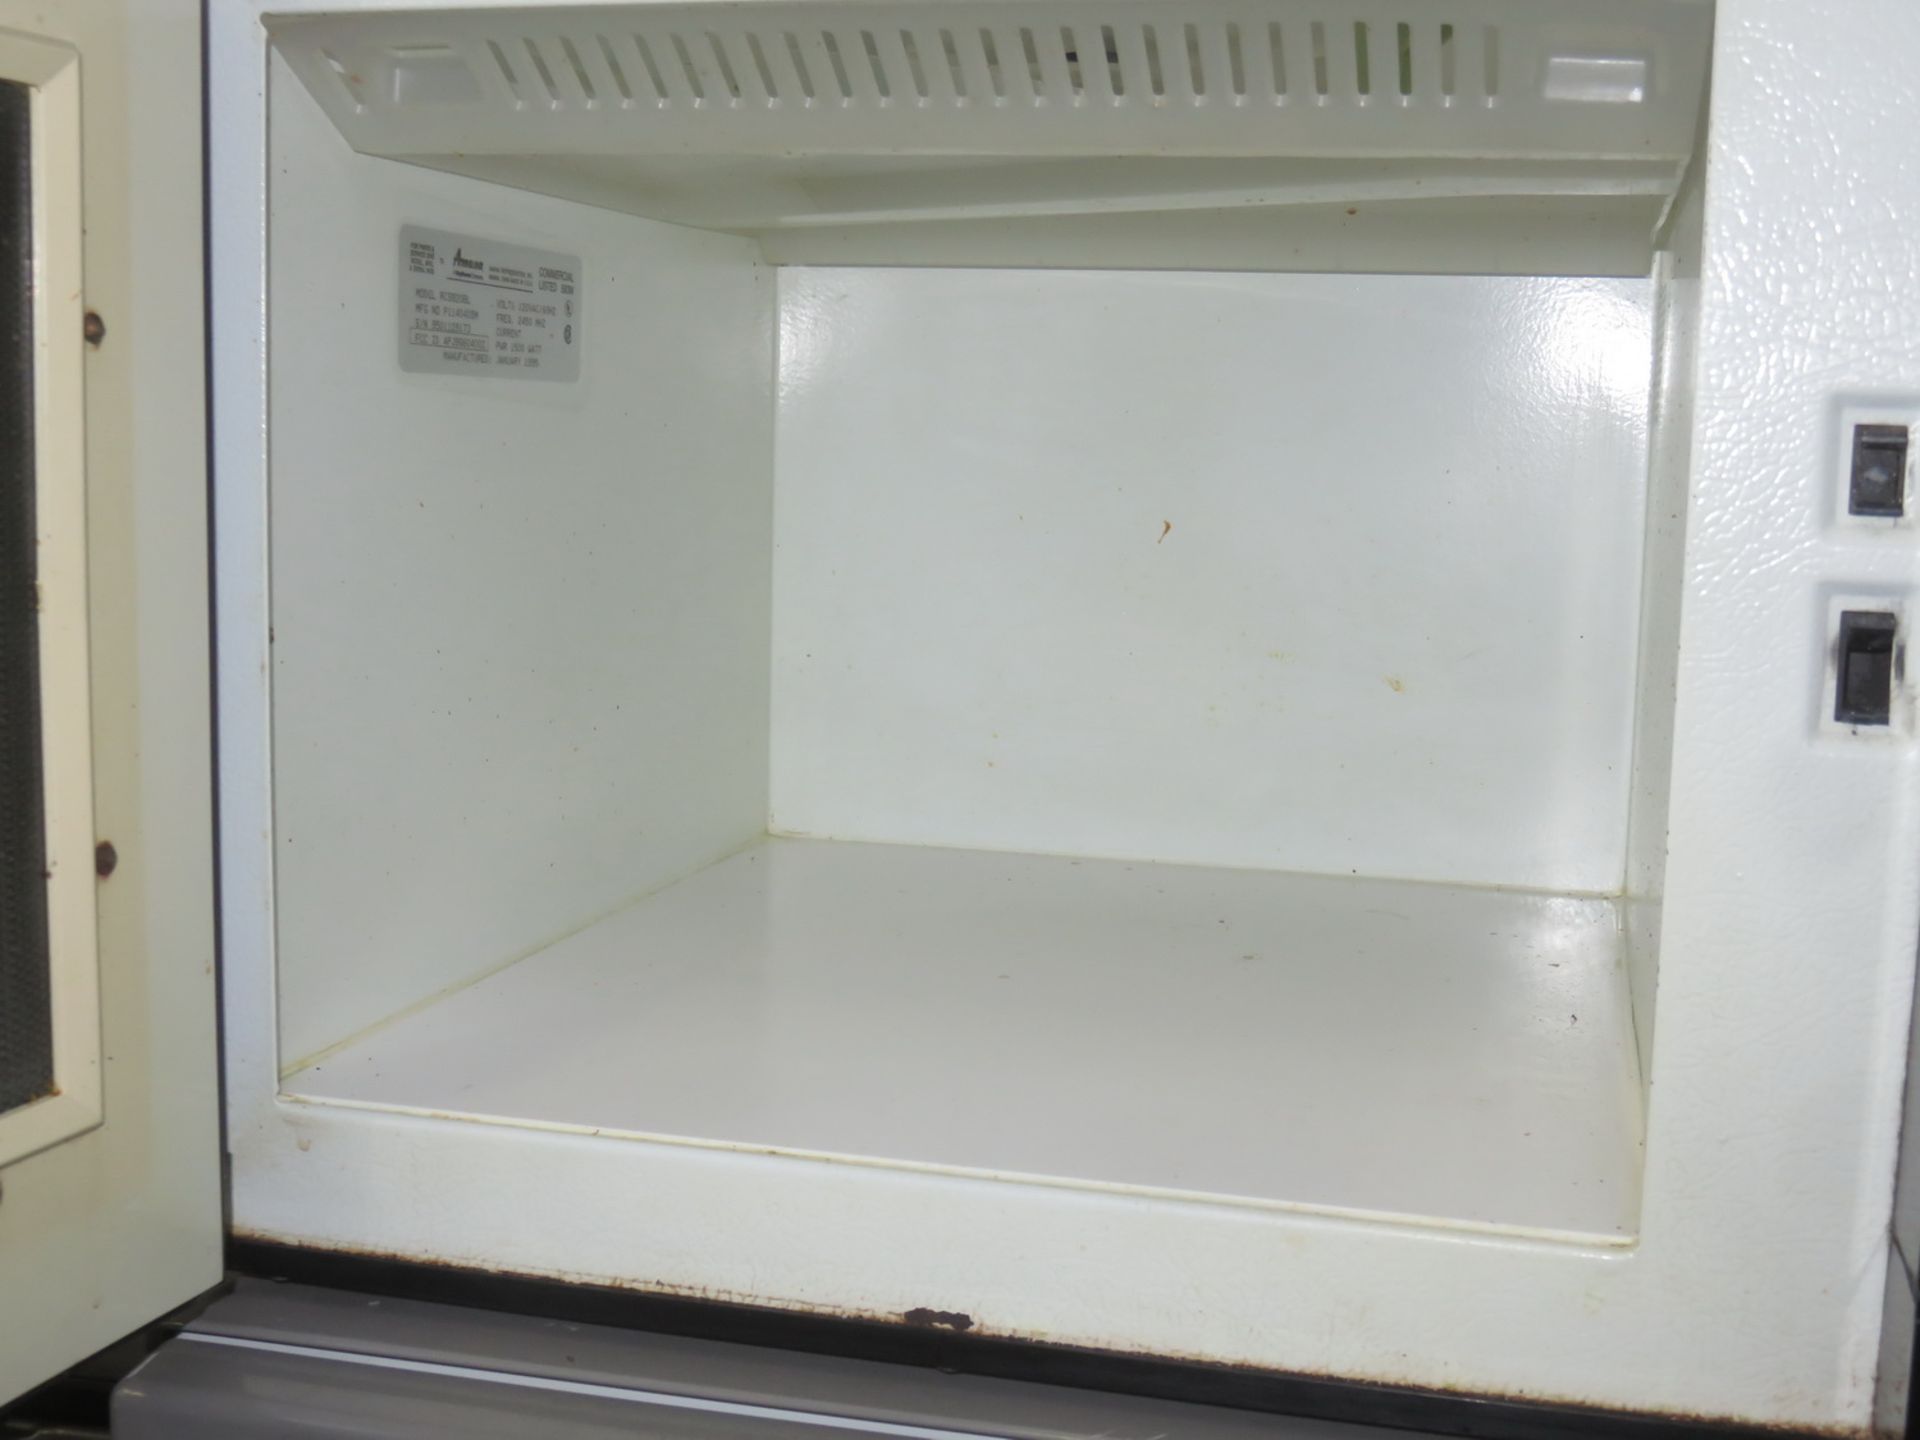 AMANA 820BL BLACK COMMERCIAL MICROWAVE - Image 2 of 2